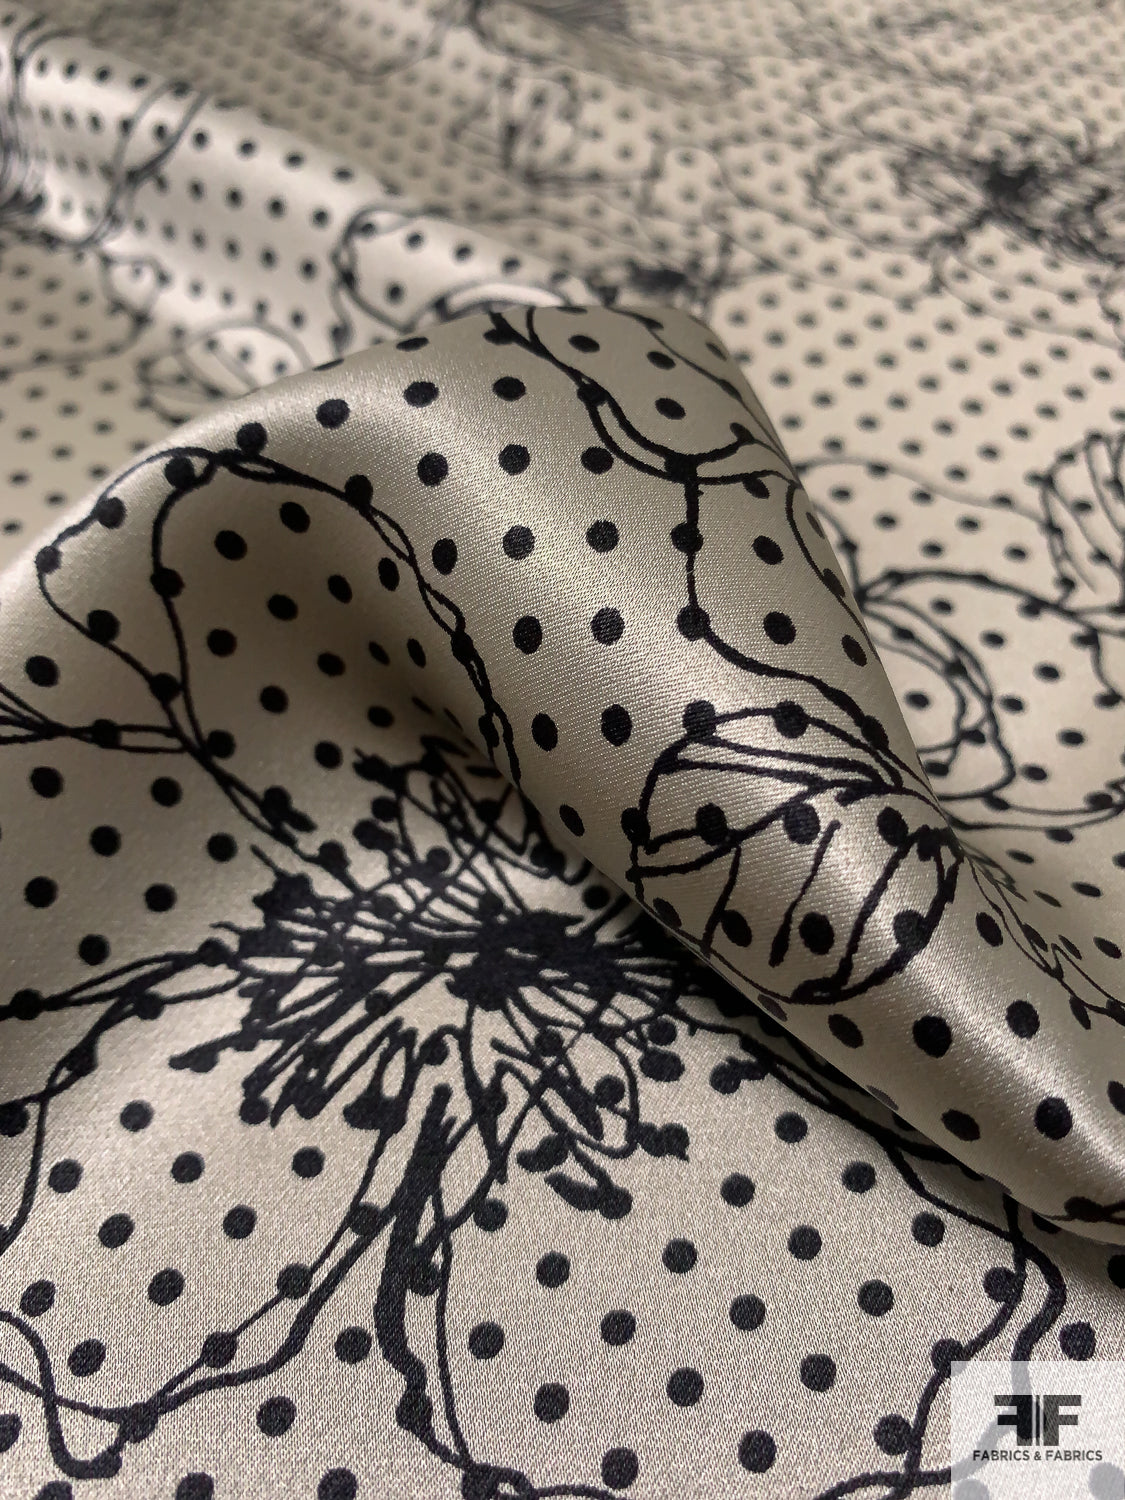 Floral Sketch and Dotted Printed Silk Charmeuse - Taupe-Grey / Black